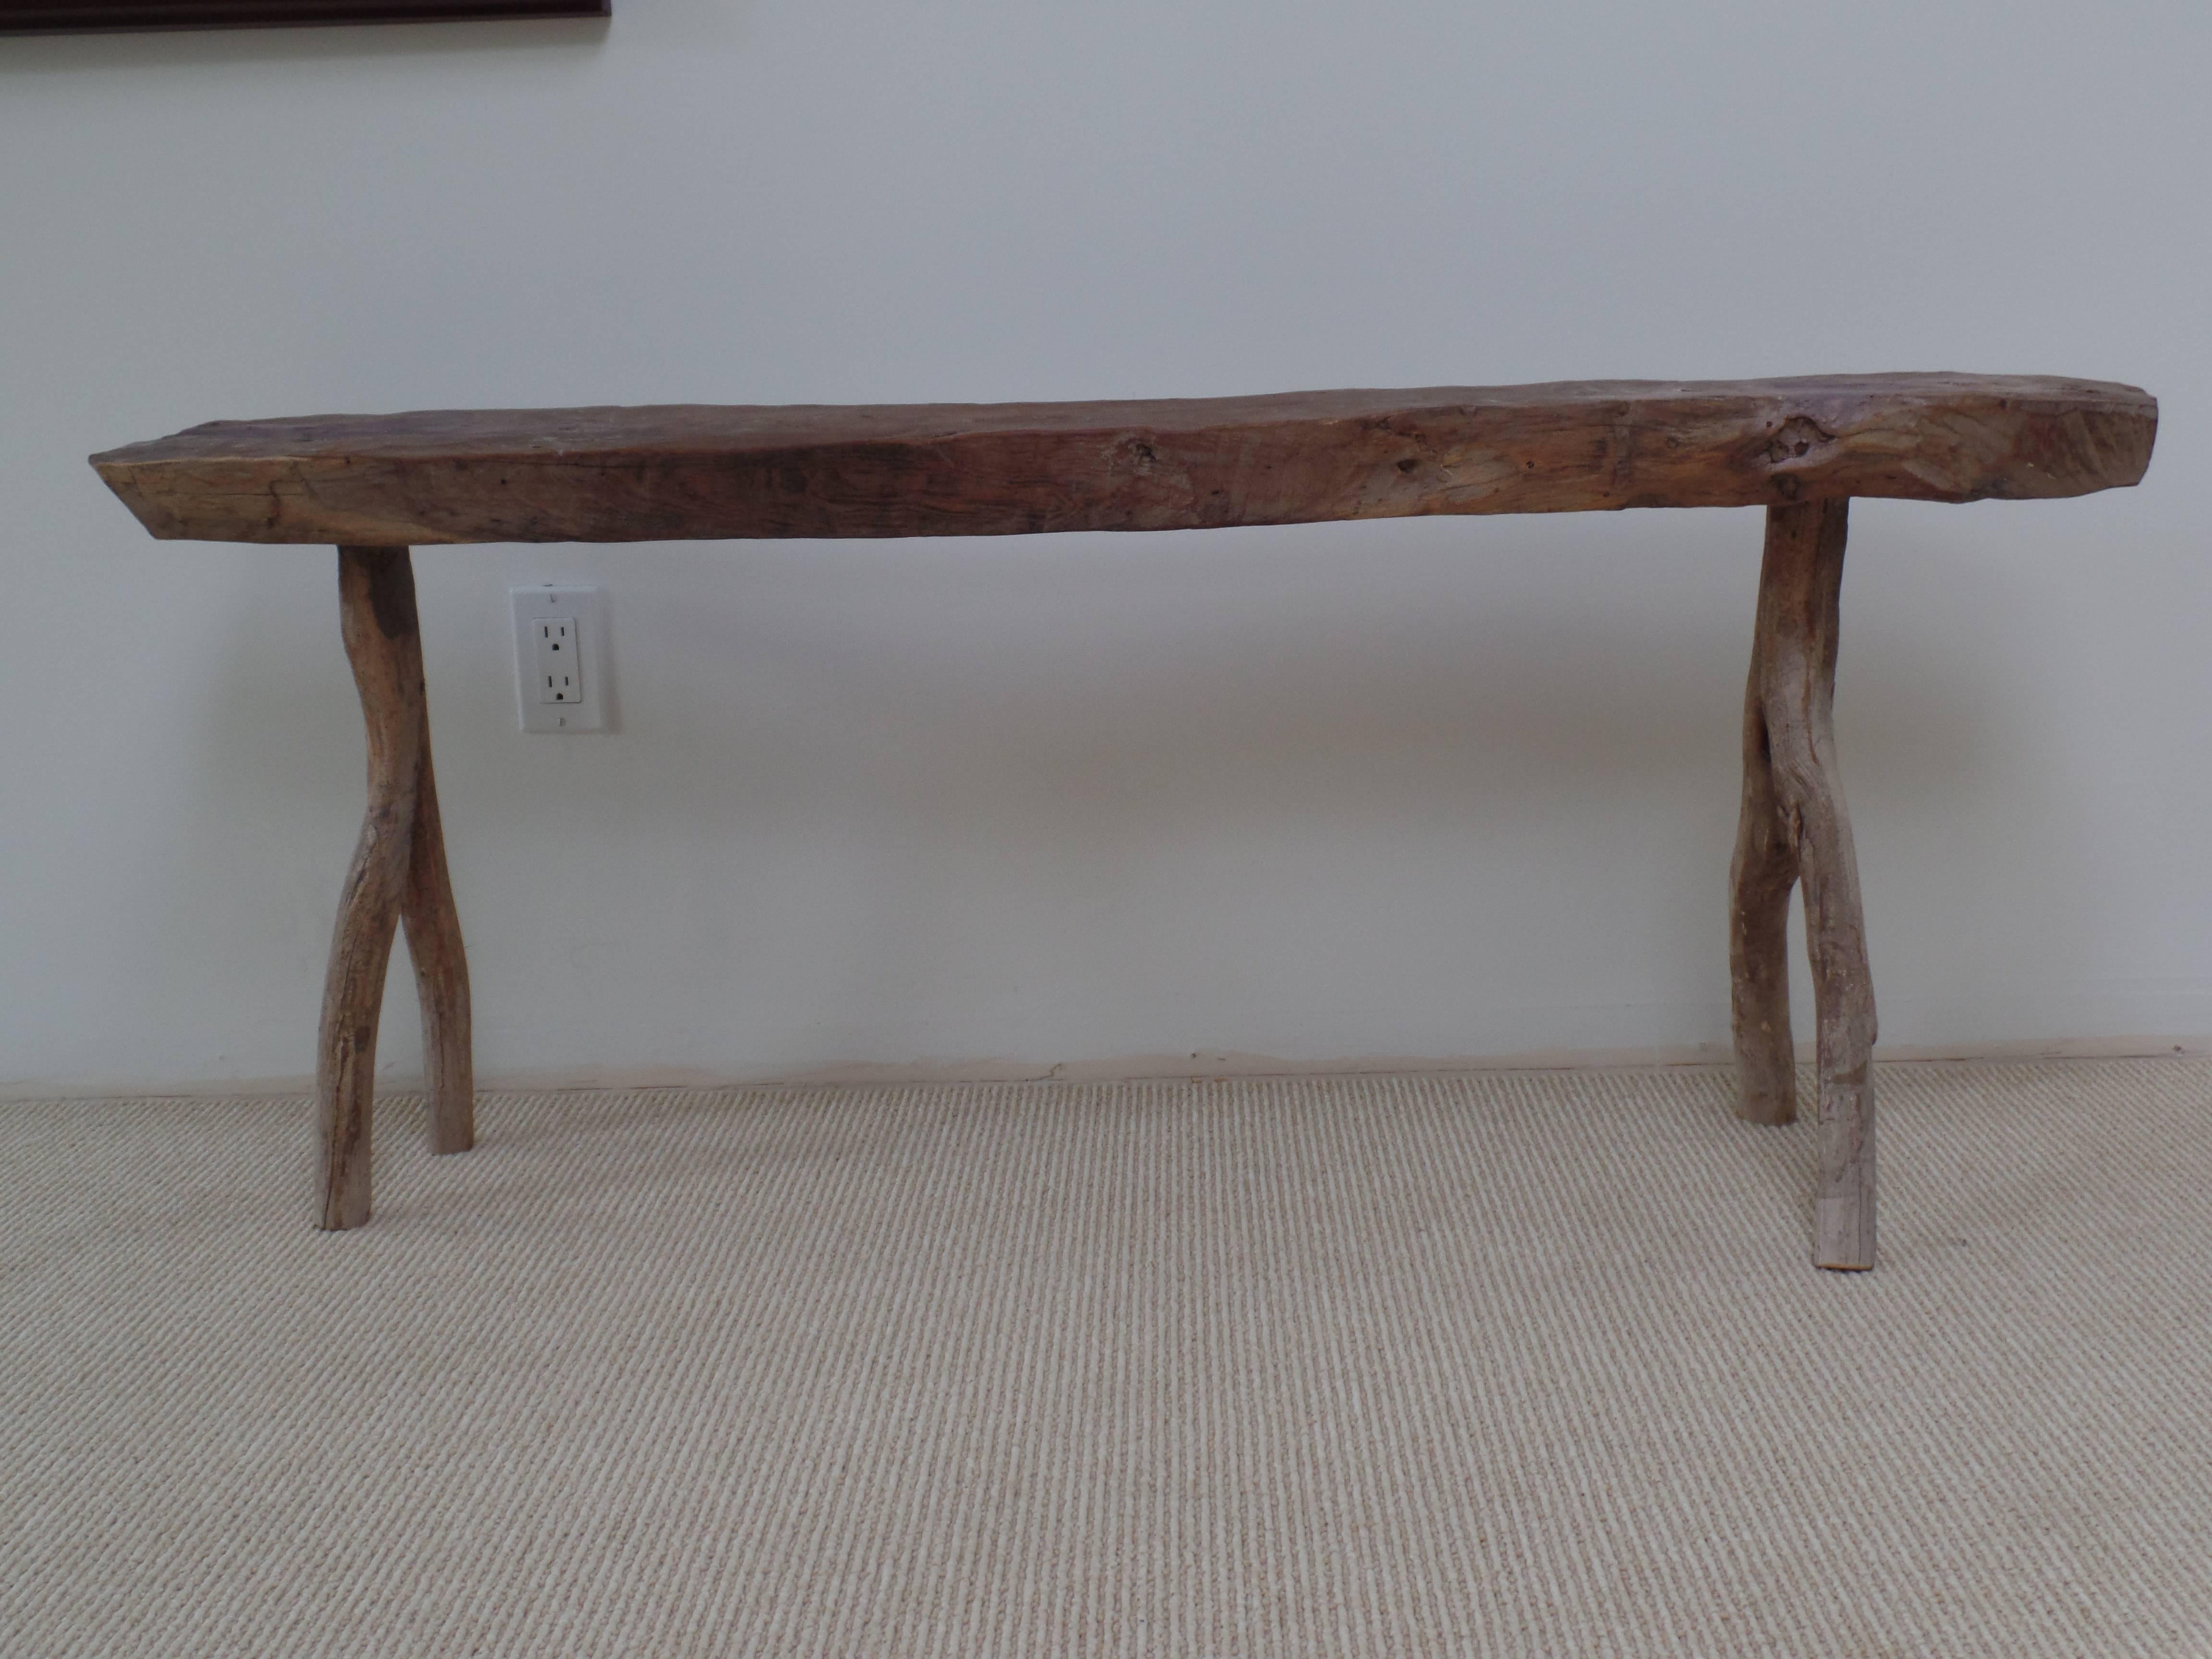 Hand-carved French Brutalist bench or settee. A comfortable, yet narrow profile bench set upon opposing legs that proudly displays it's Primitive rough hewn character. Comfortable and sculptural. 

Seat is W 51